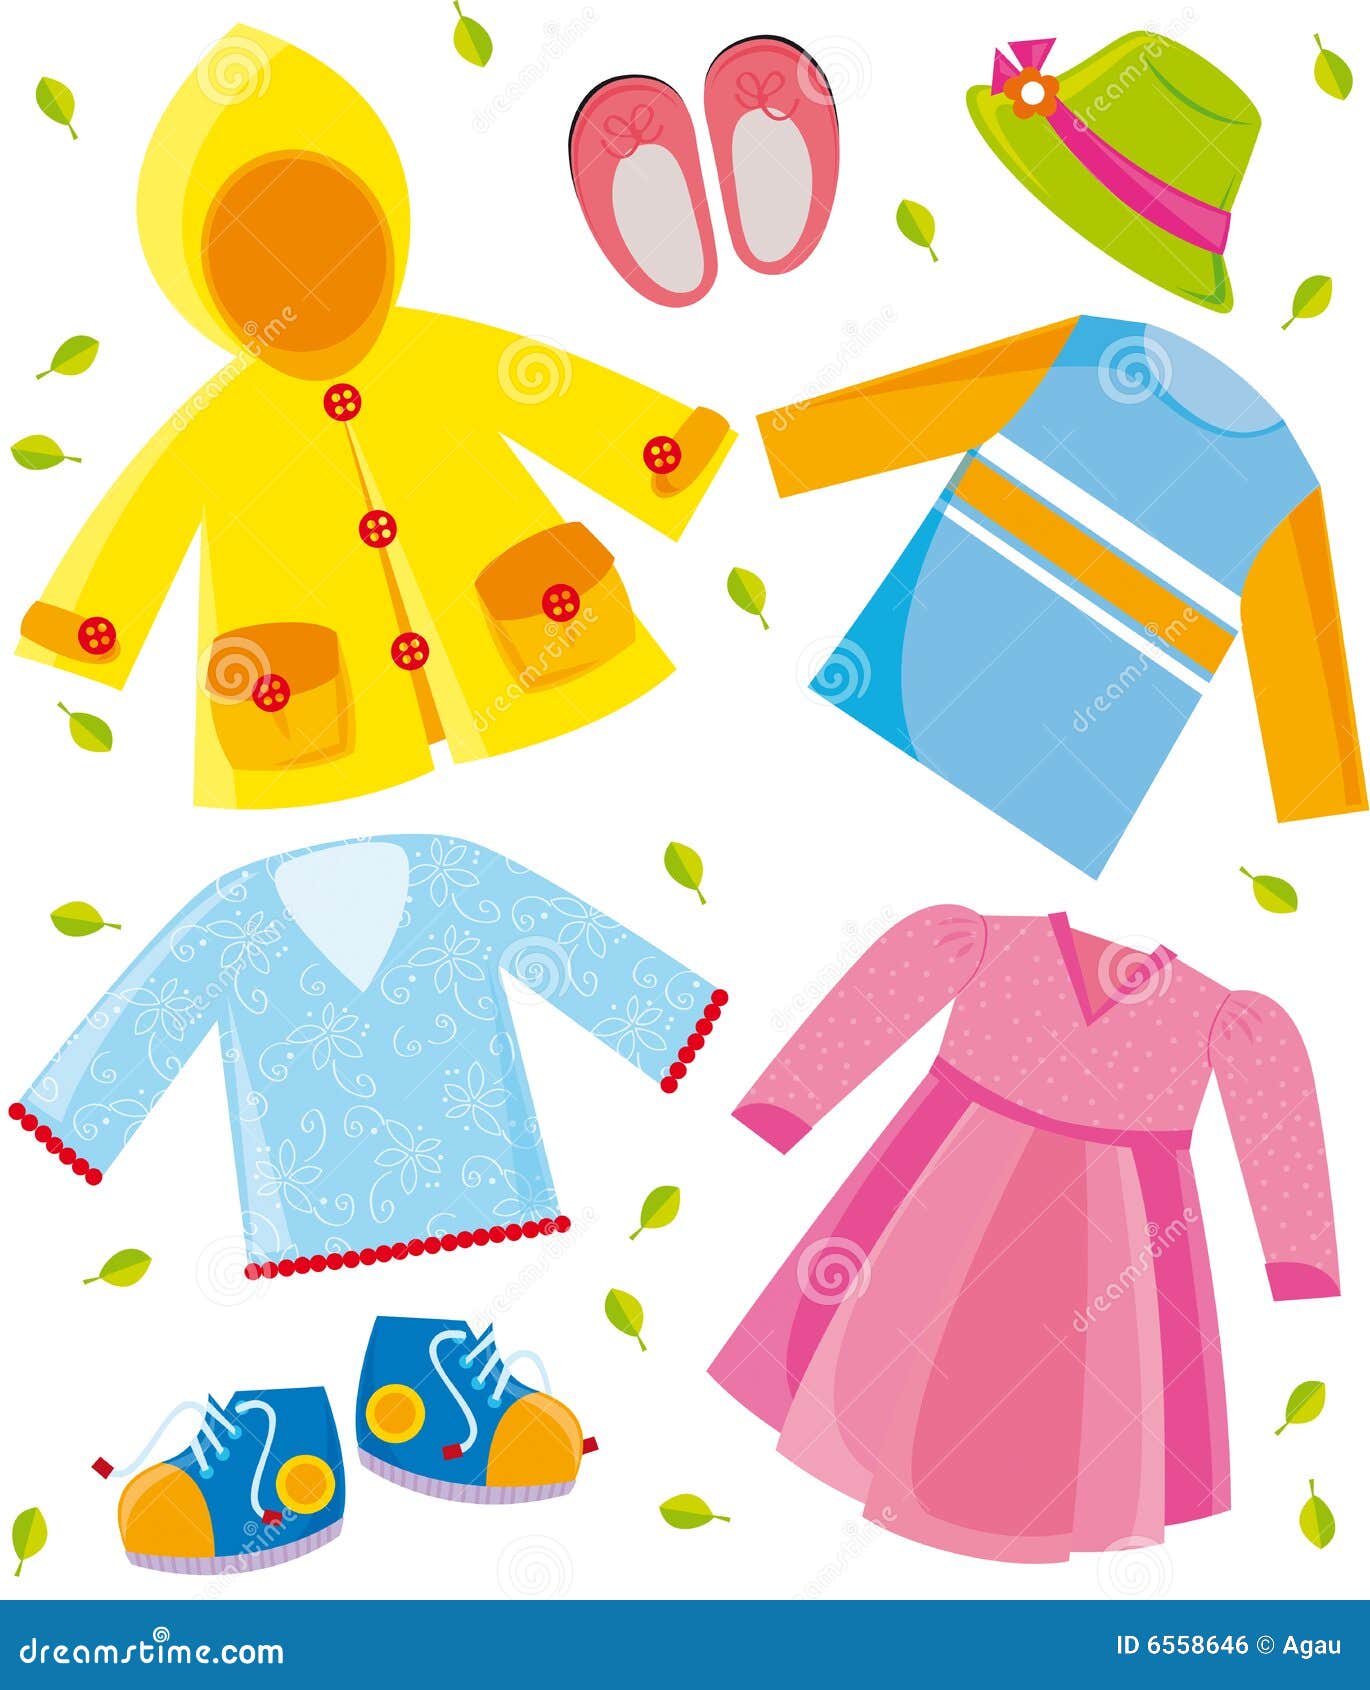 clipart of clothes - photo #48